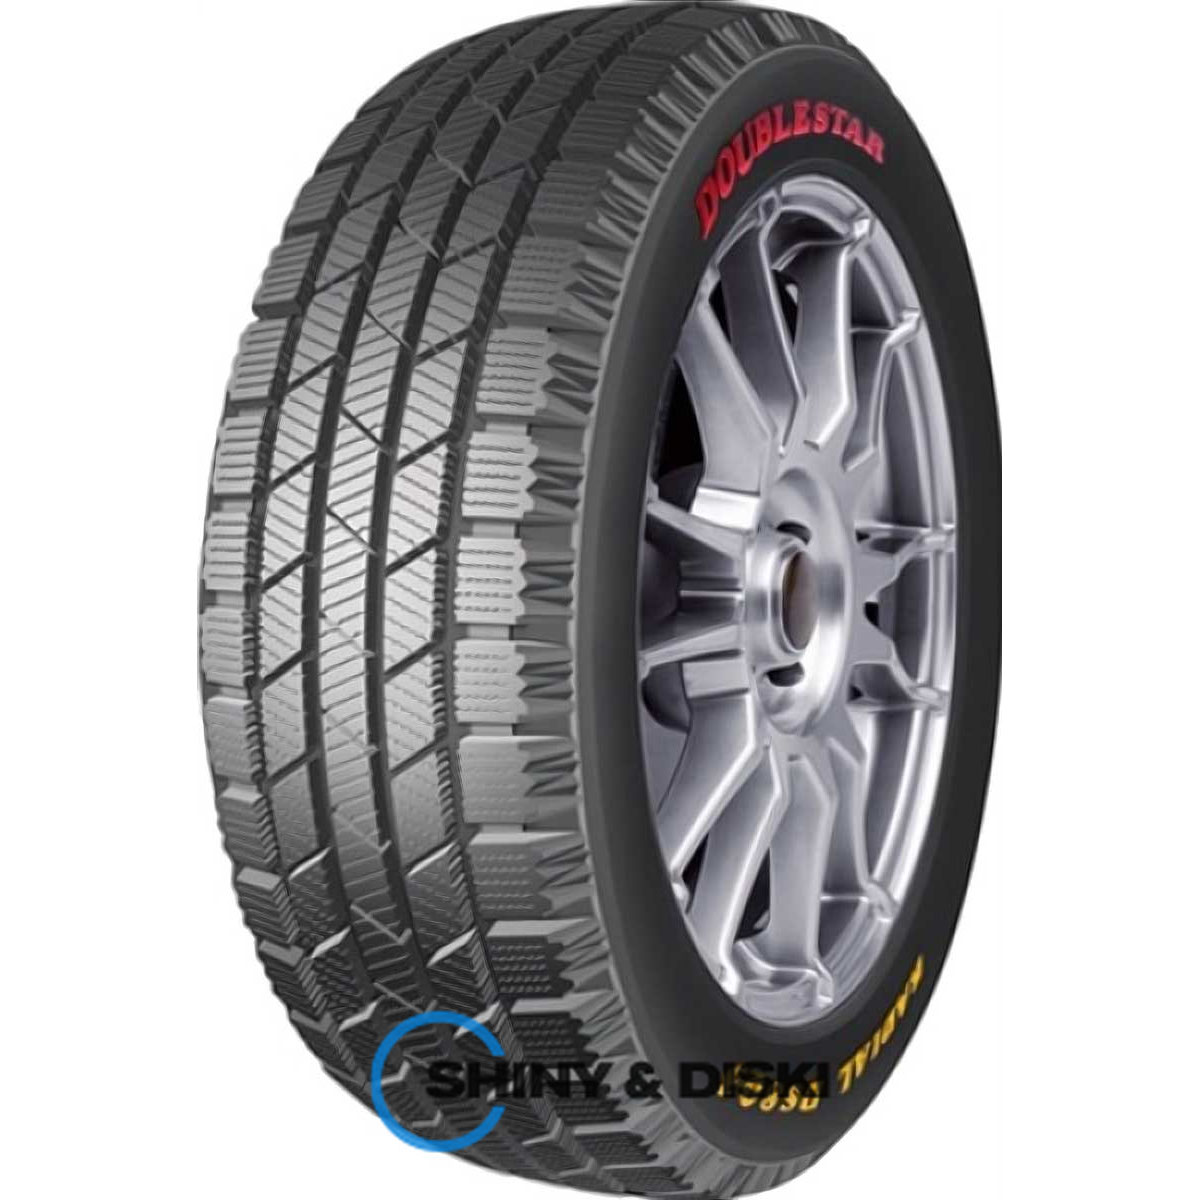 doublestar ds803 205/60 r16 92h